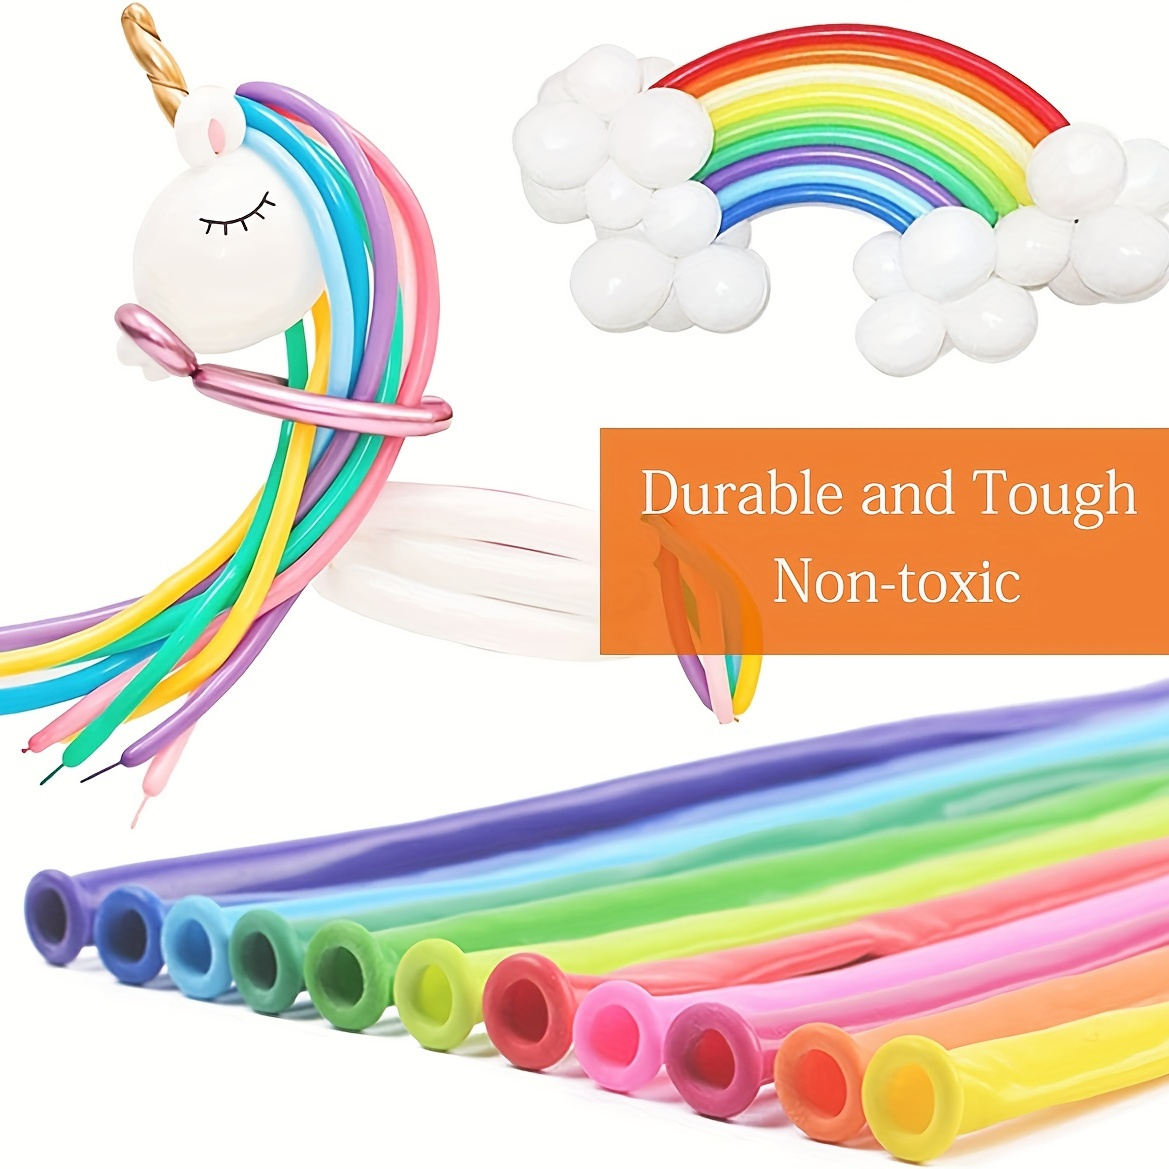 

100pcs, Premium Pastel Balloons - 260 Latex Twisting Balloons For Birthday, Wedding, Festival, And Party Decorations